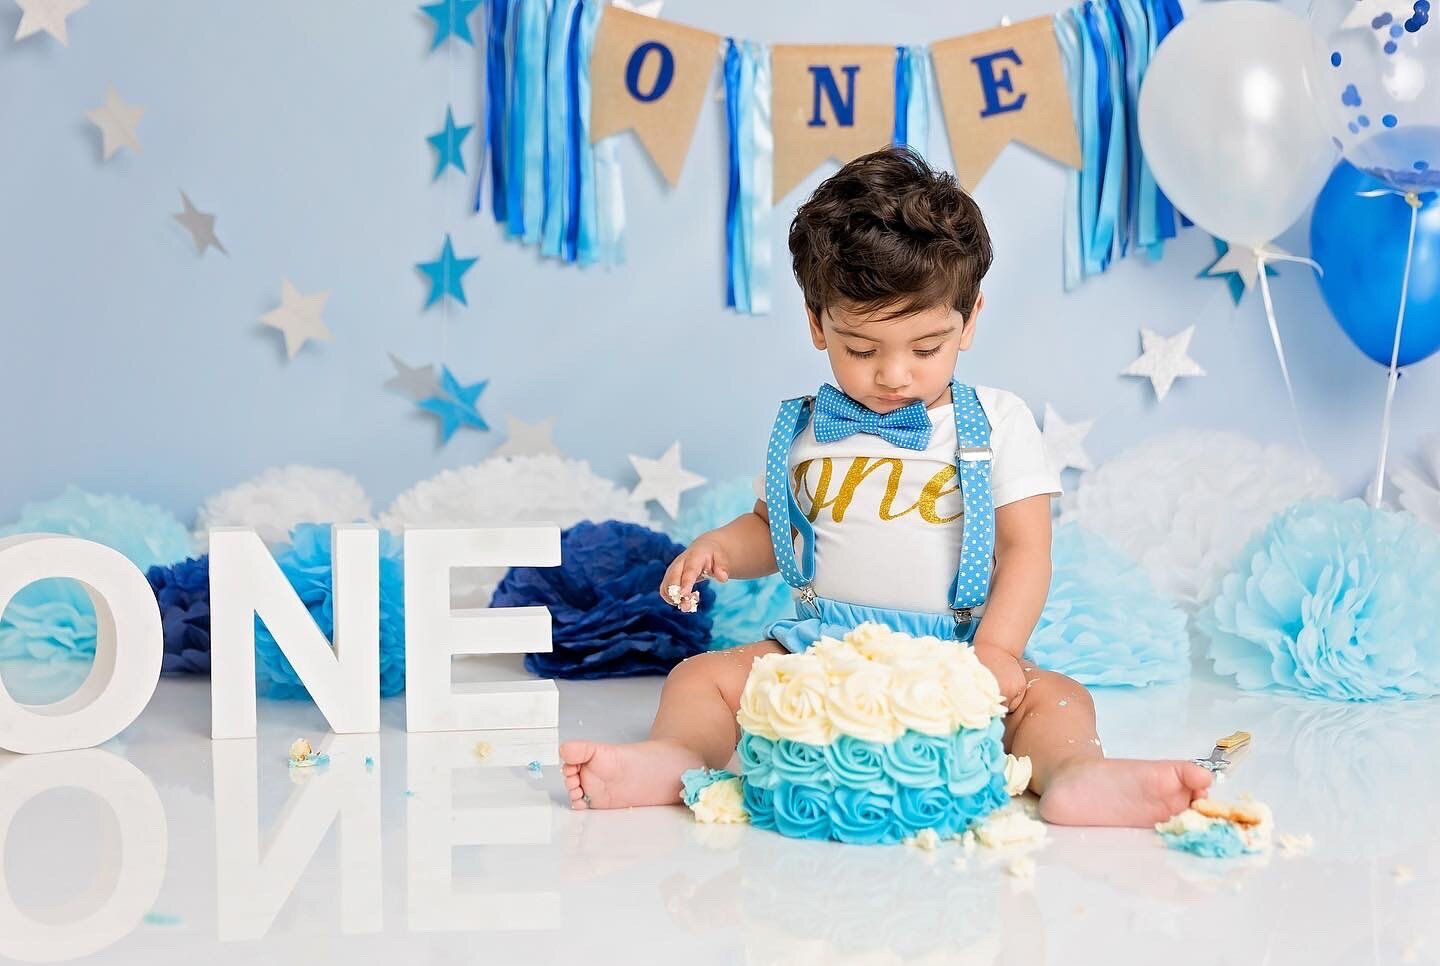 The messiest but most fun photoshoot to celebrate your child's first birthday. Use the photos for invitations or to post on their special day.

@bumblebee_photo_london #mumlife #londonmums #ealingmums #ealingcakesmashphotographer #ealingfamilyphotogr